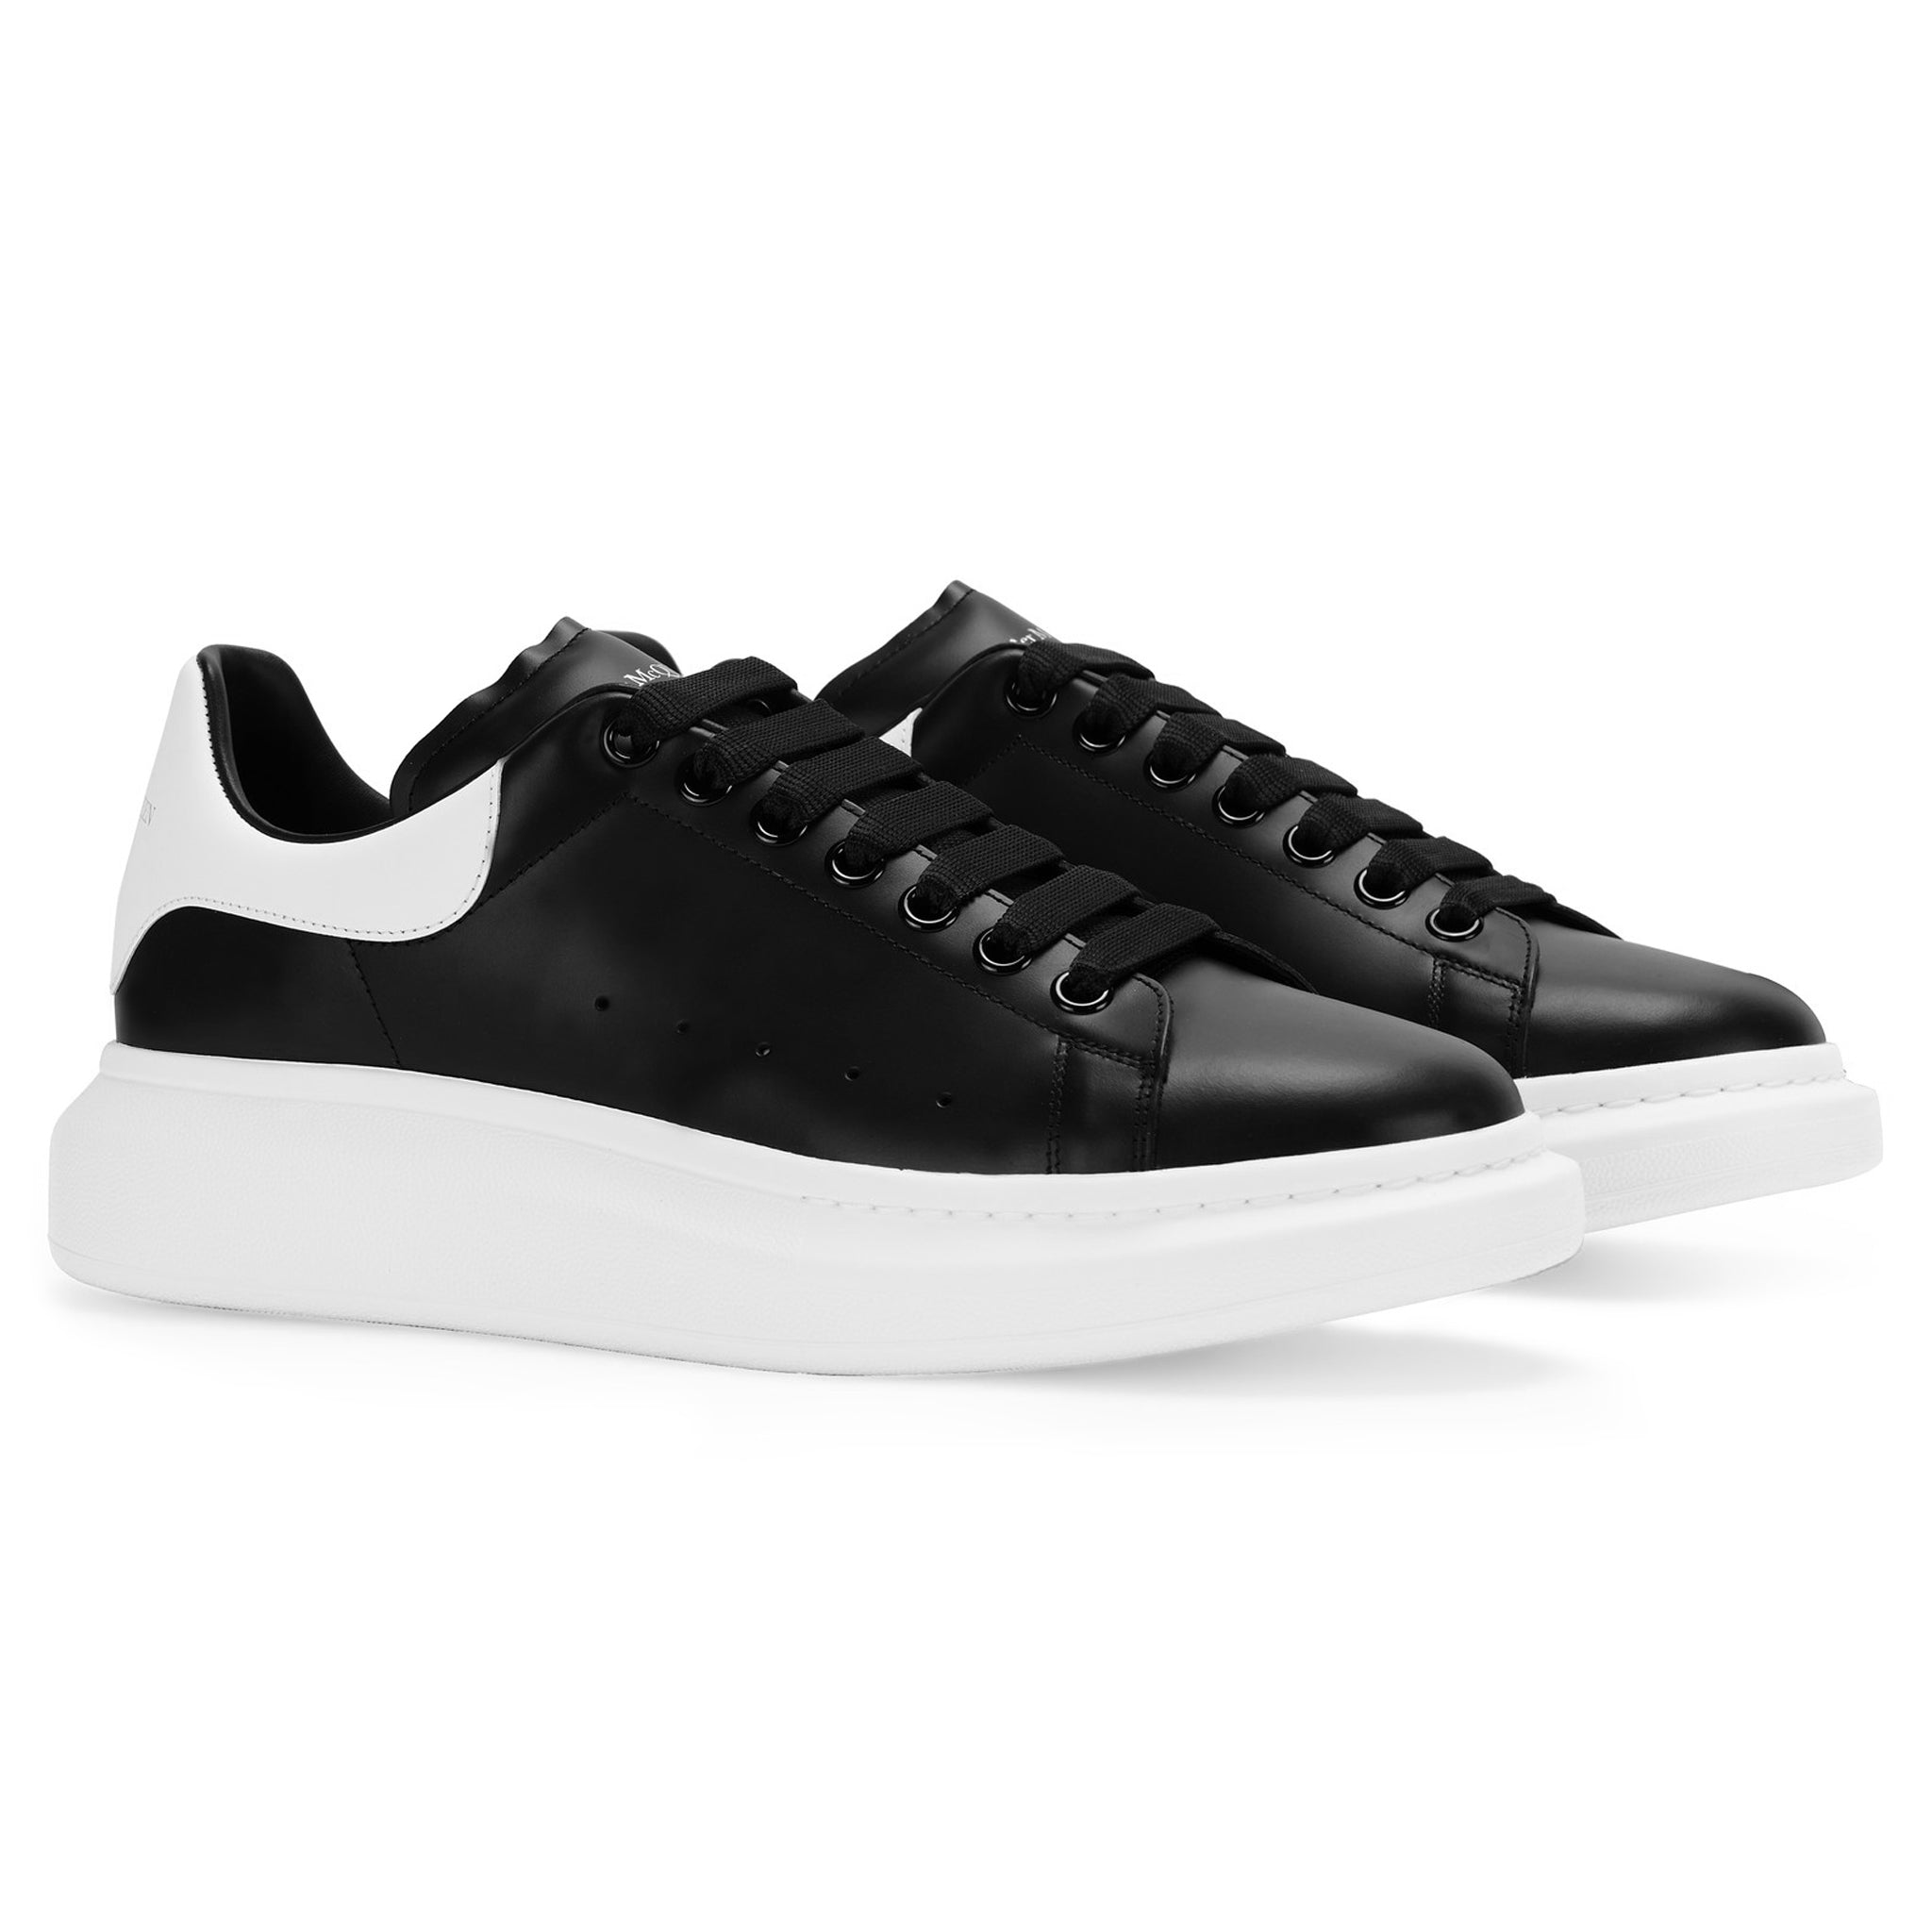 Front side view of Alexander Mcqueen Raised Sole Black White Sneaker